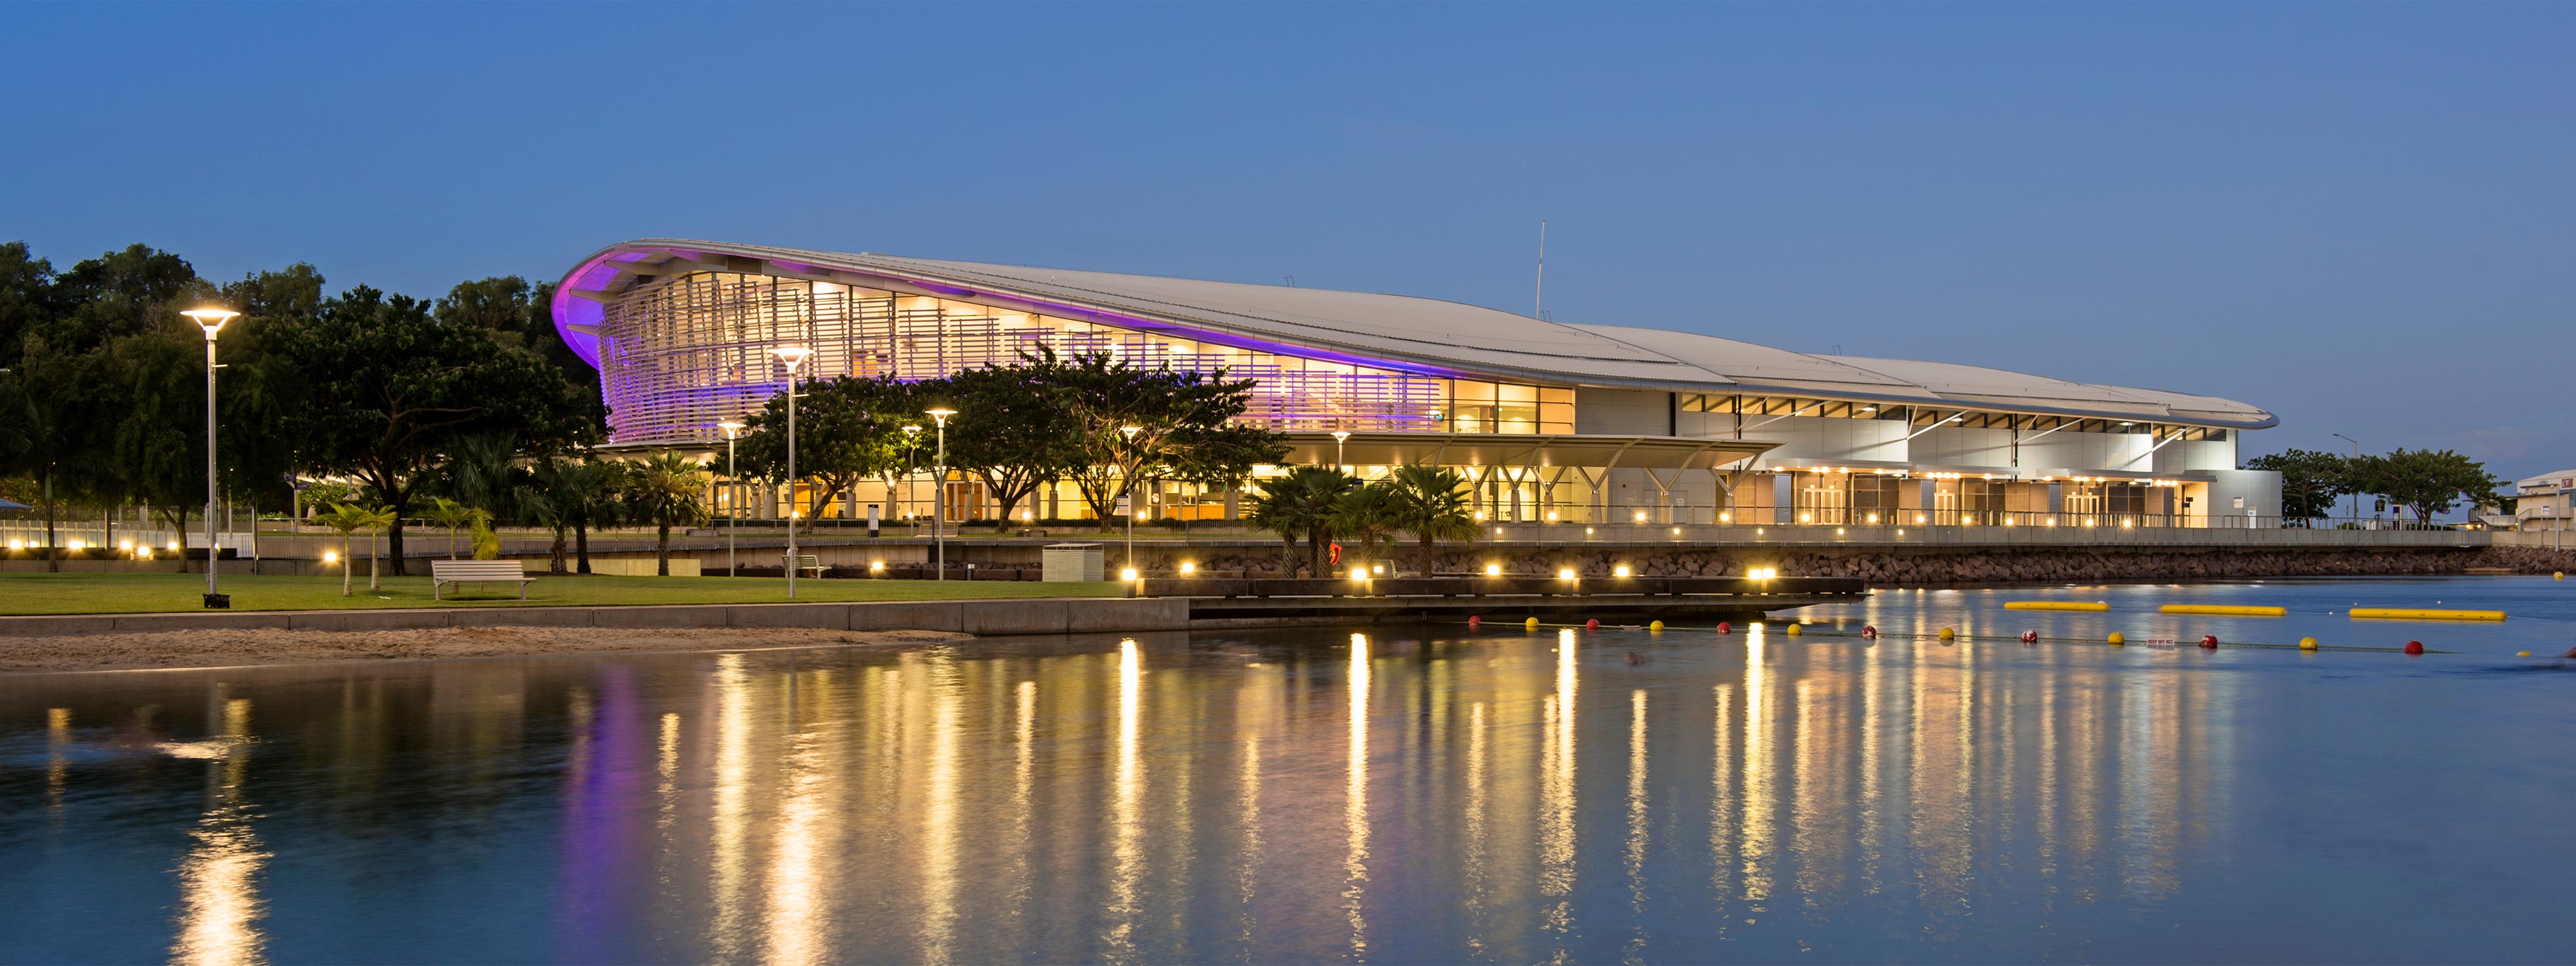 Darwin Convention Centre wins Gold at National MEA Awards